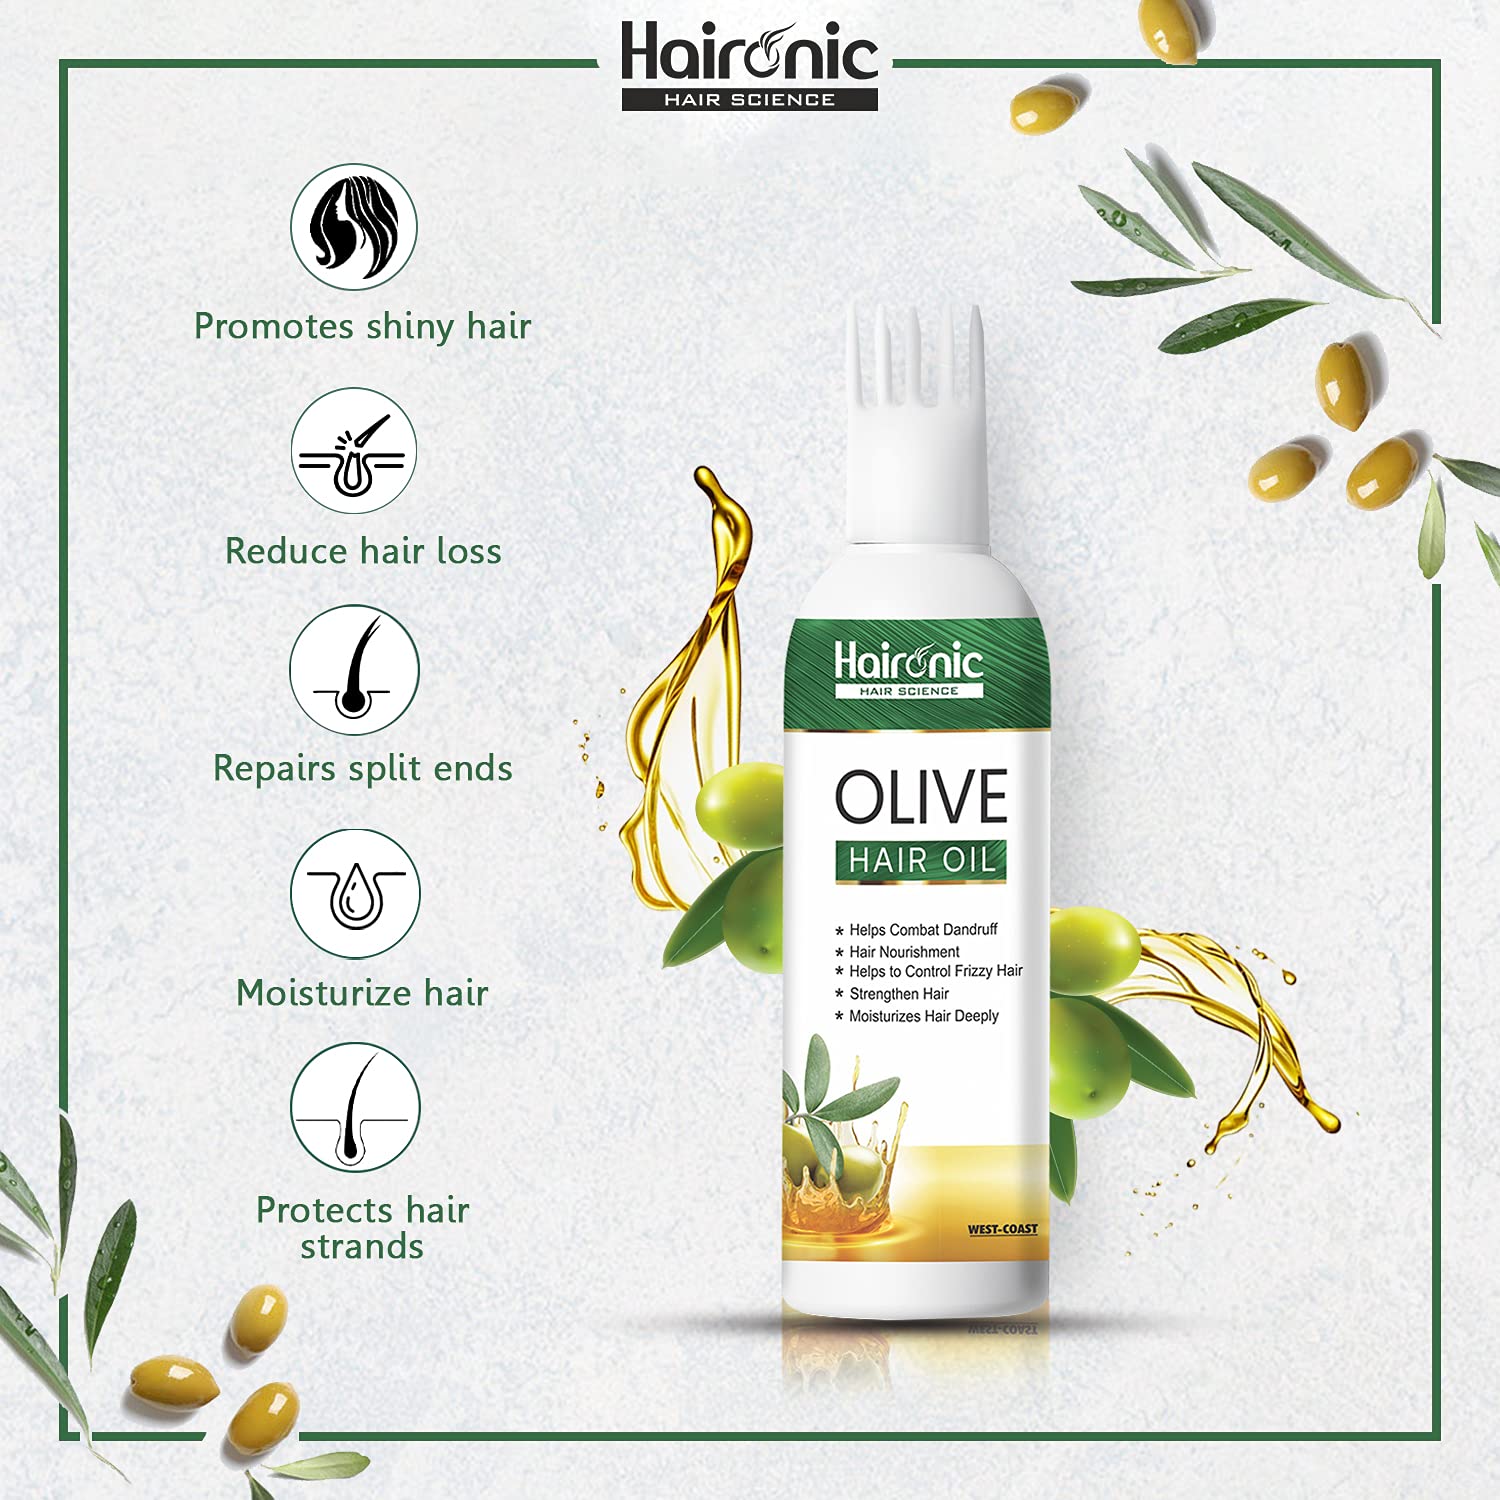 Haironic Hair Science Olive Hair Oil | Helps Combat Dandruff, Smooth Dry Hair, Reduces Hair Fall & Reduces Hair Breakage - 100ml